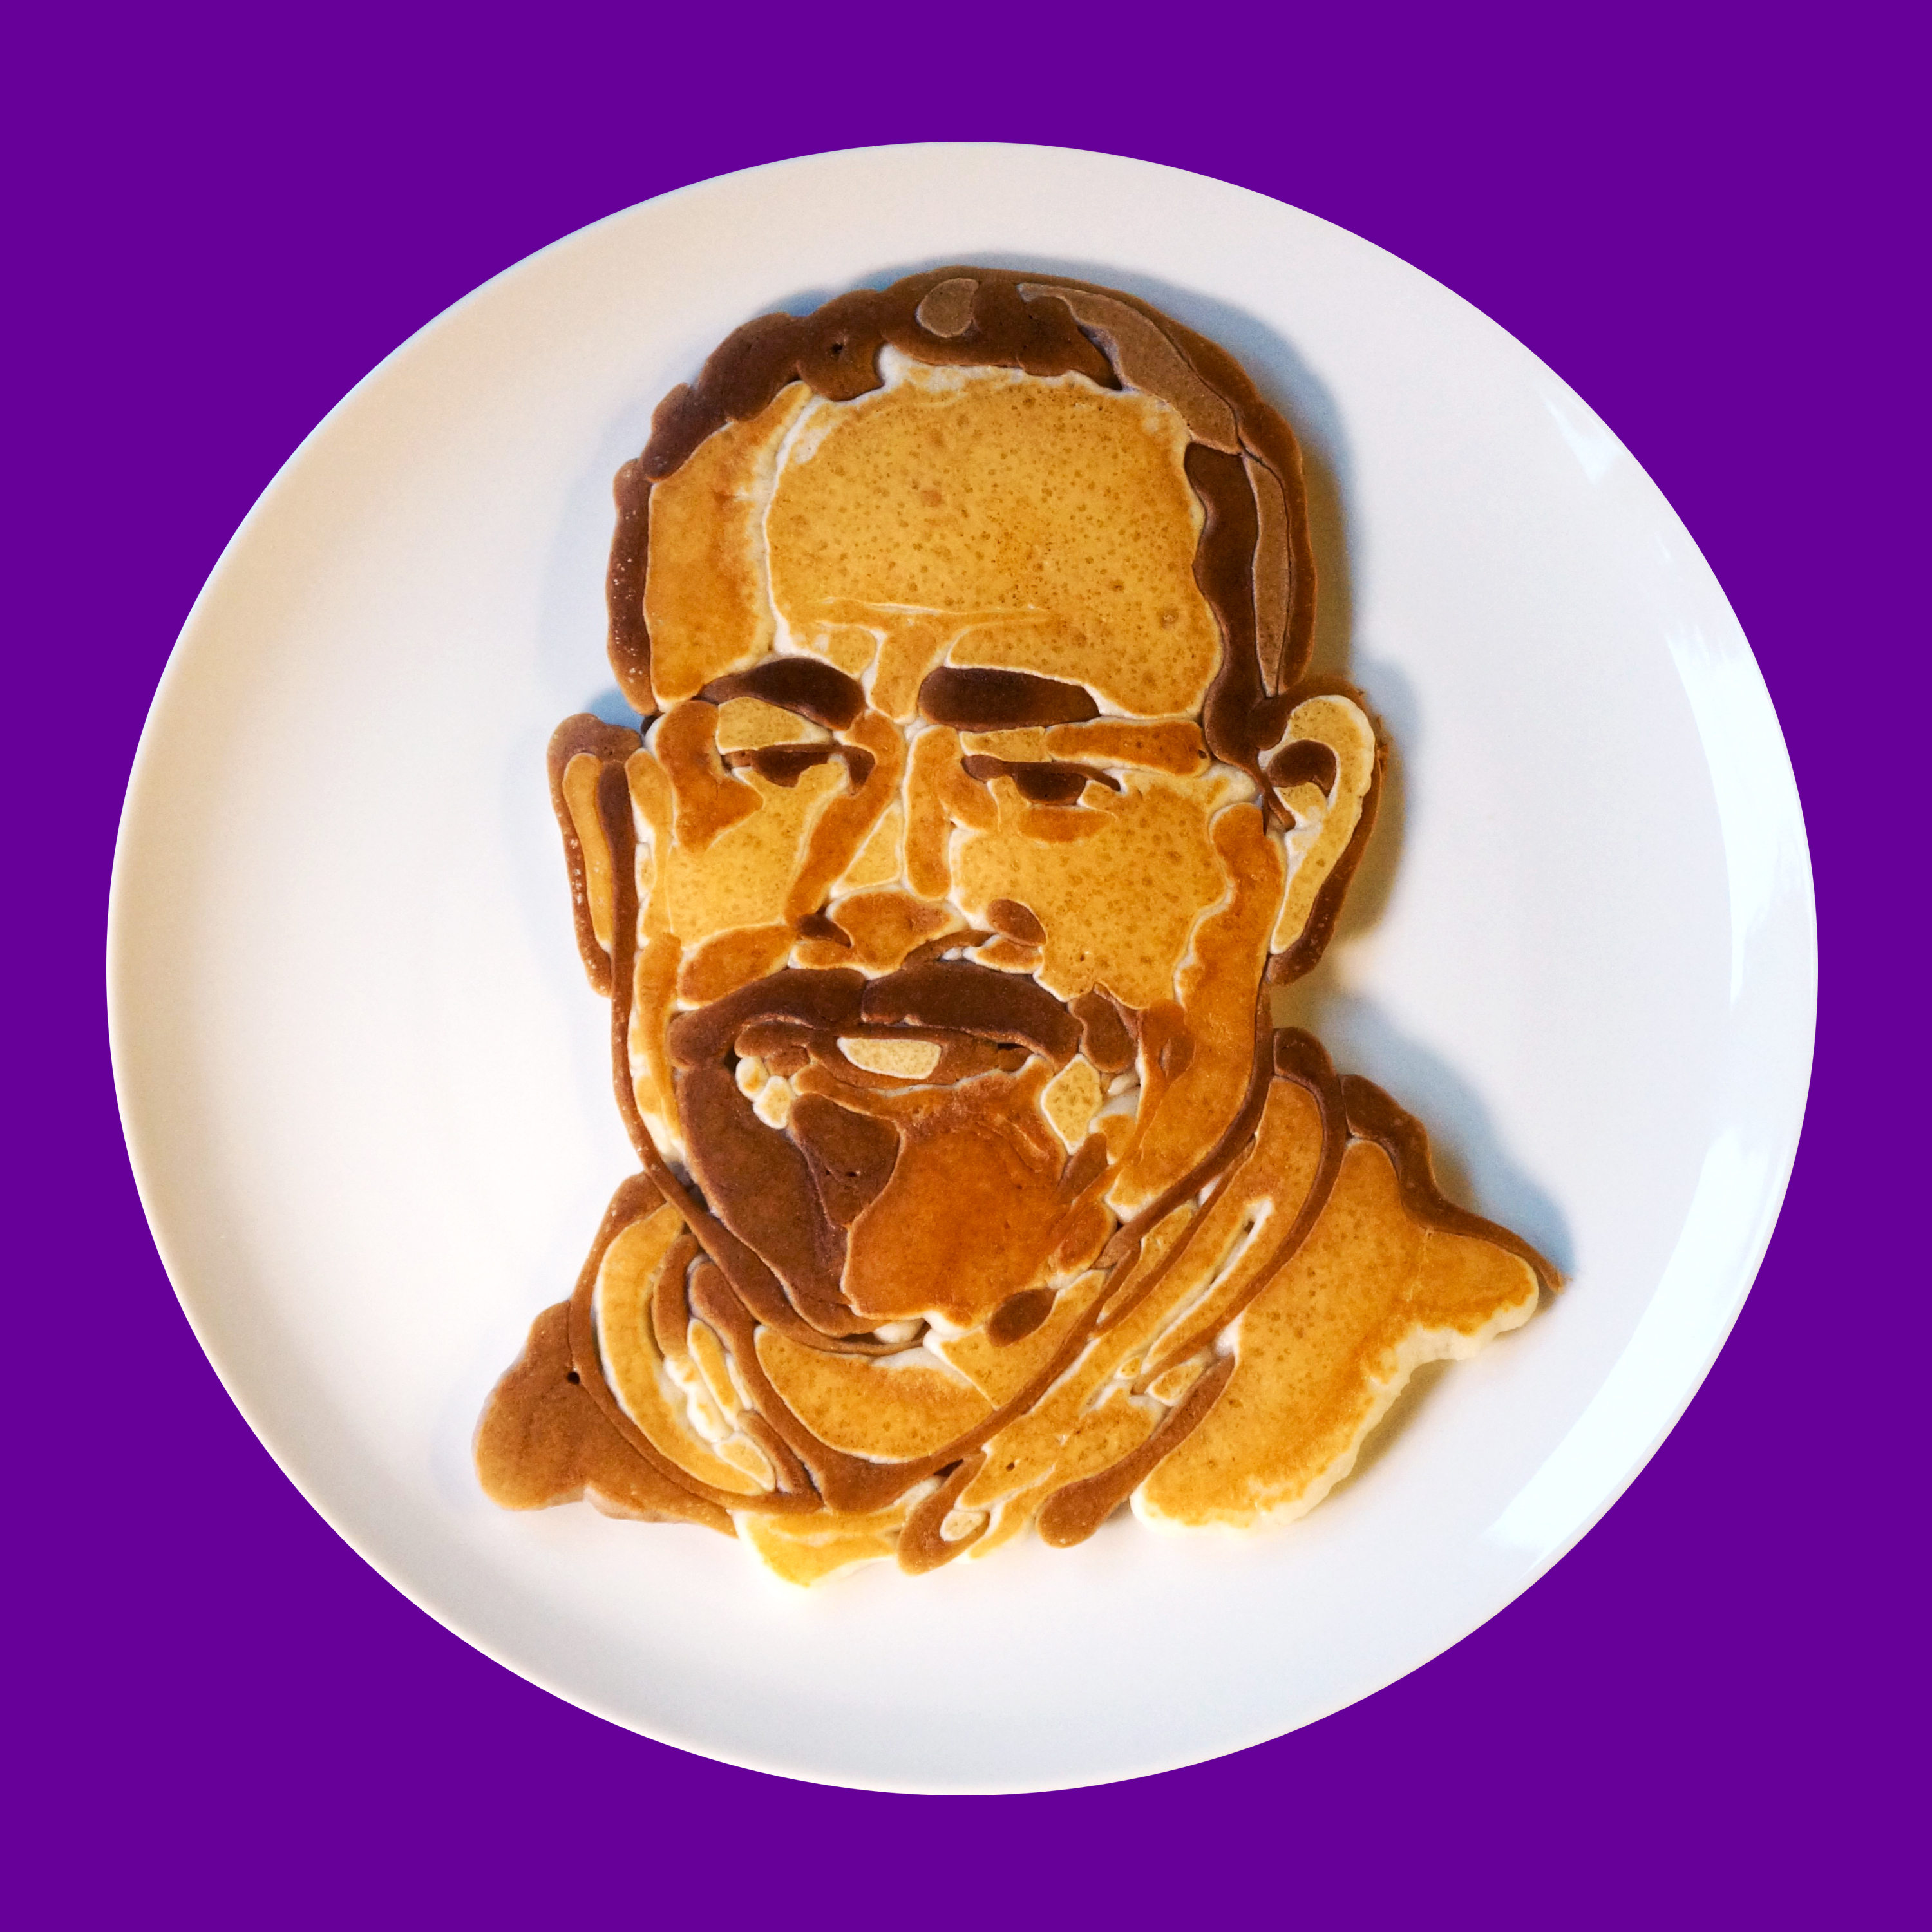 Nathan Shields creates pancake portraits of famous faces for NOW TV, Jeffrey Dean Morgan from The Walking Dead